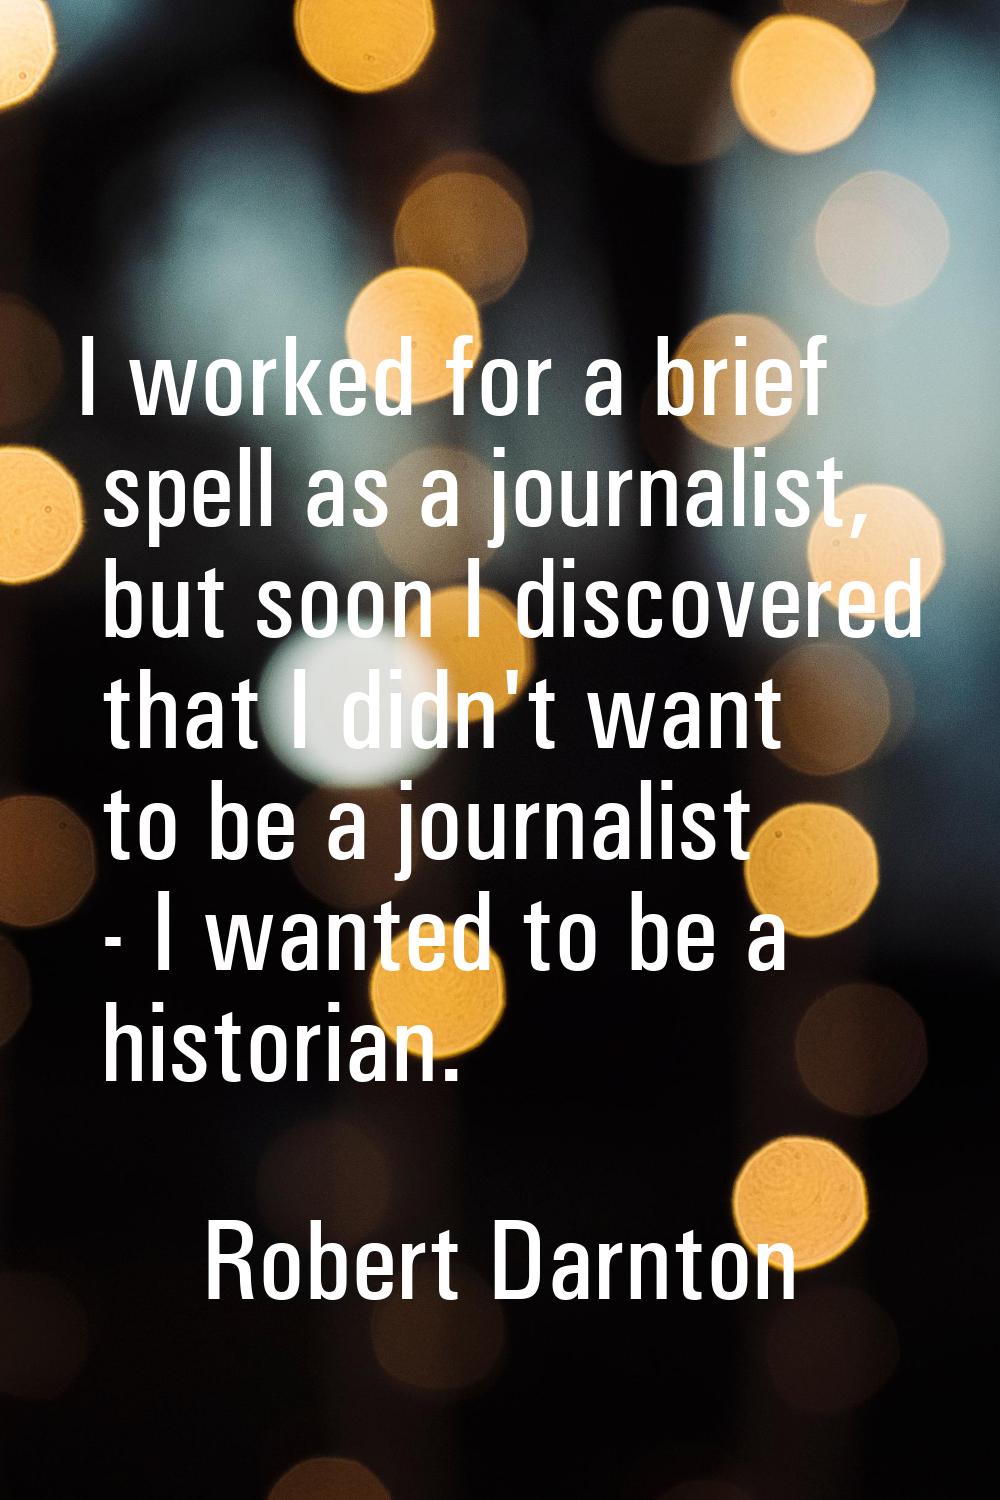 I worked for a brief spell as a journalist, but soon I discovered that I didn't want to be a journa